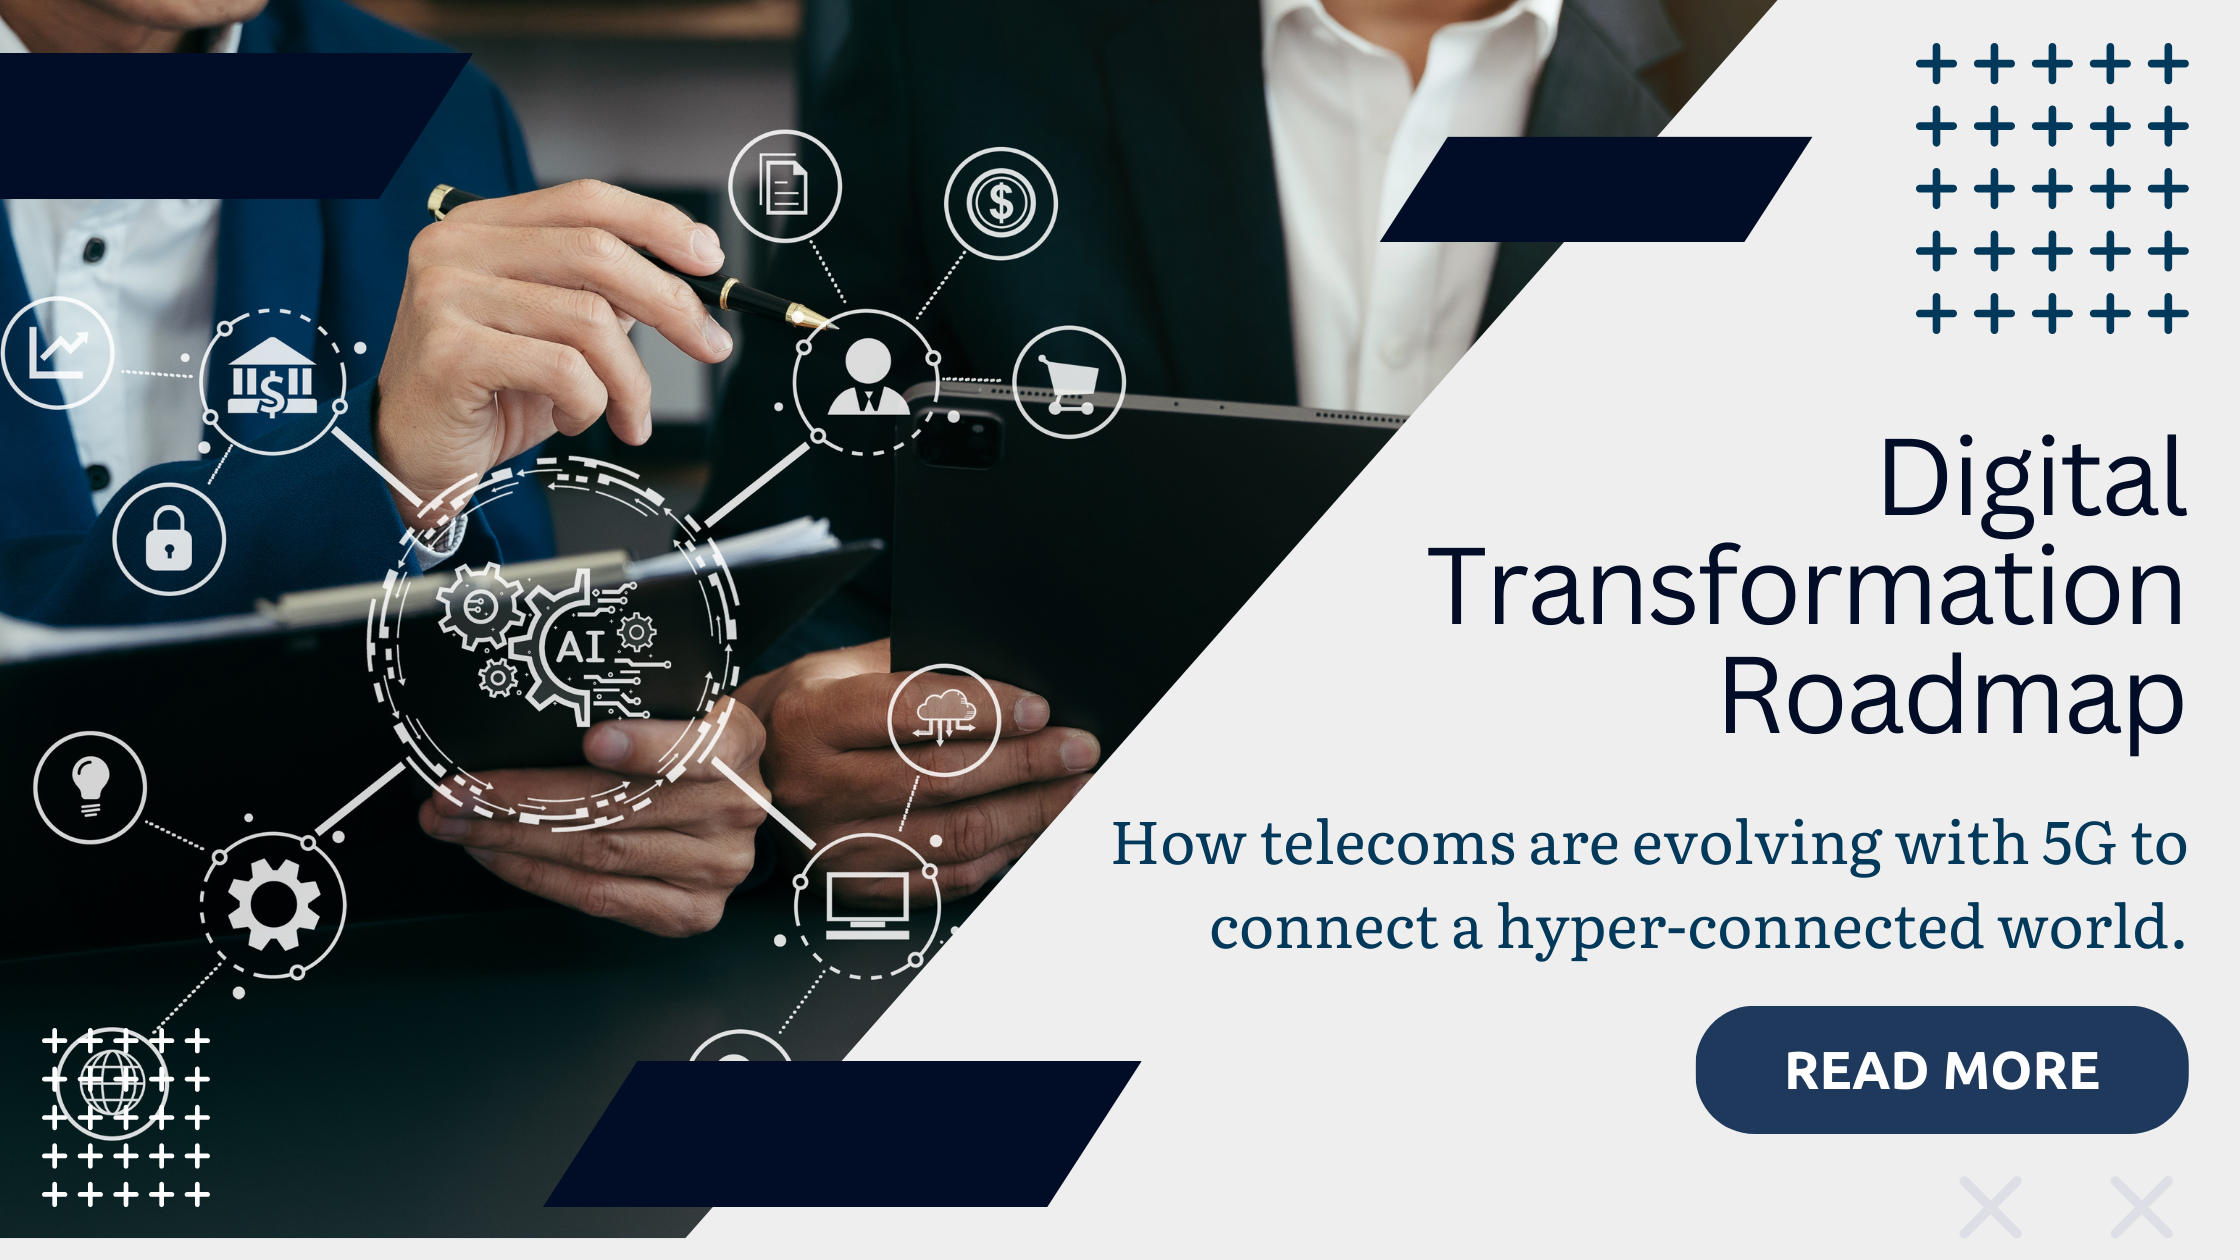 Digital Transformation Roadmap: How Telecoms are Evolving with 5G to Connect a Hyper-Connected Words